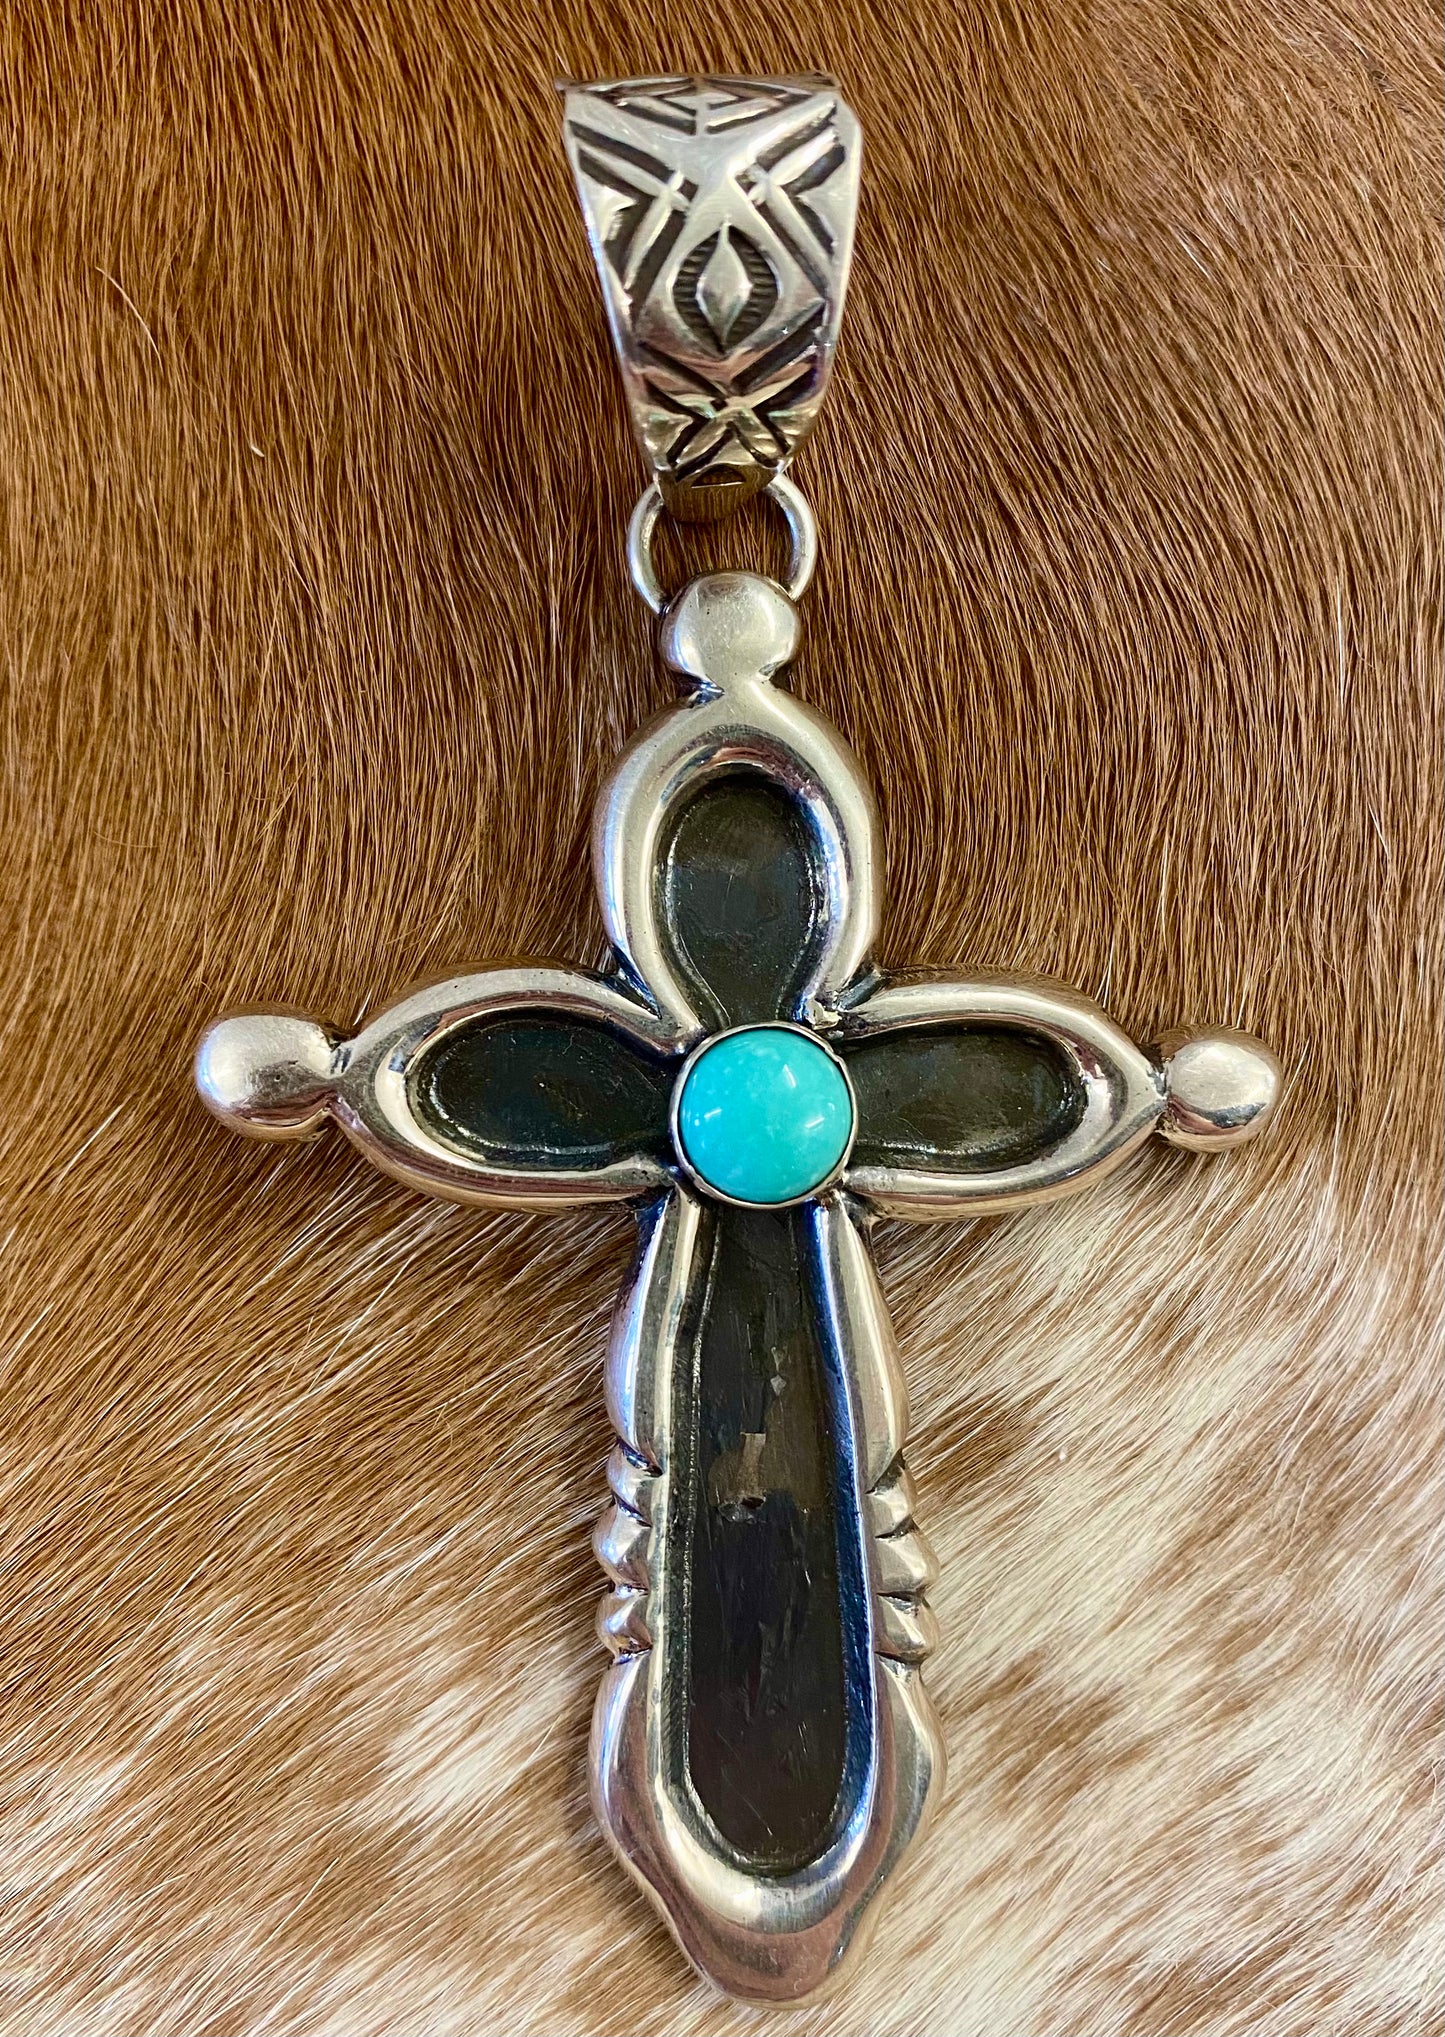 Beautiful sterling silver Native made turquoise cross pendant. Stamped sterling and signed H. JOE by Native American artist silversmith. The perfect cross to wear on any length chain necklace or a 6-7mm Navajo pearl necklace.   Size: 3” Inches length without bale x 2” inches width - bale .5” inch length   Signed: YES "H. JOE"  Hallmark/Artist: H. JOE  Stone: Turquoise 